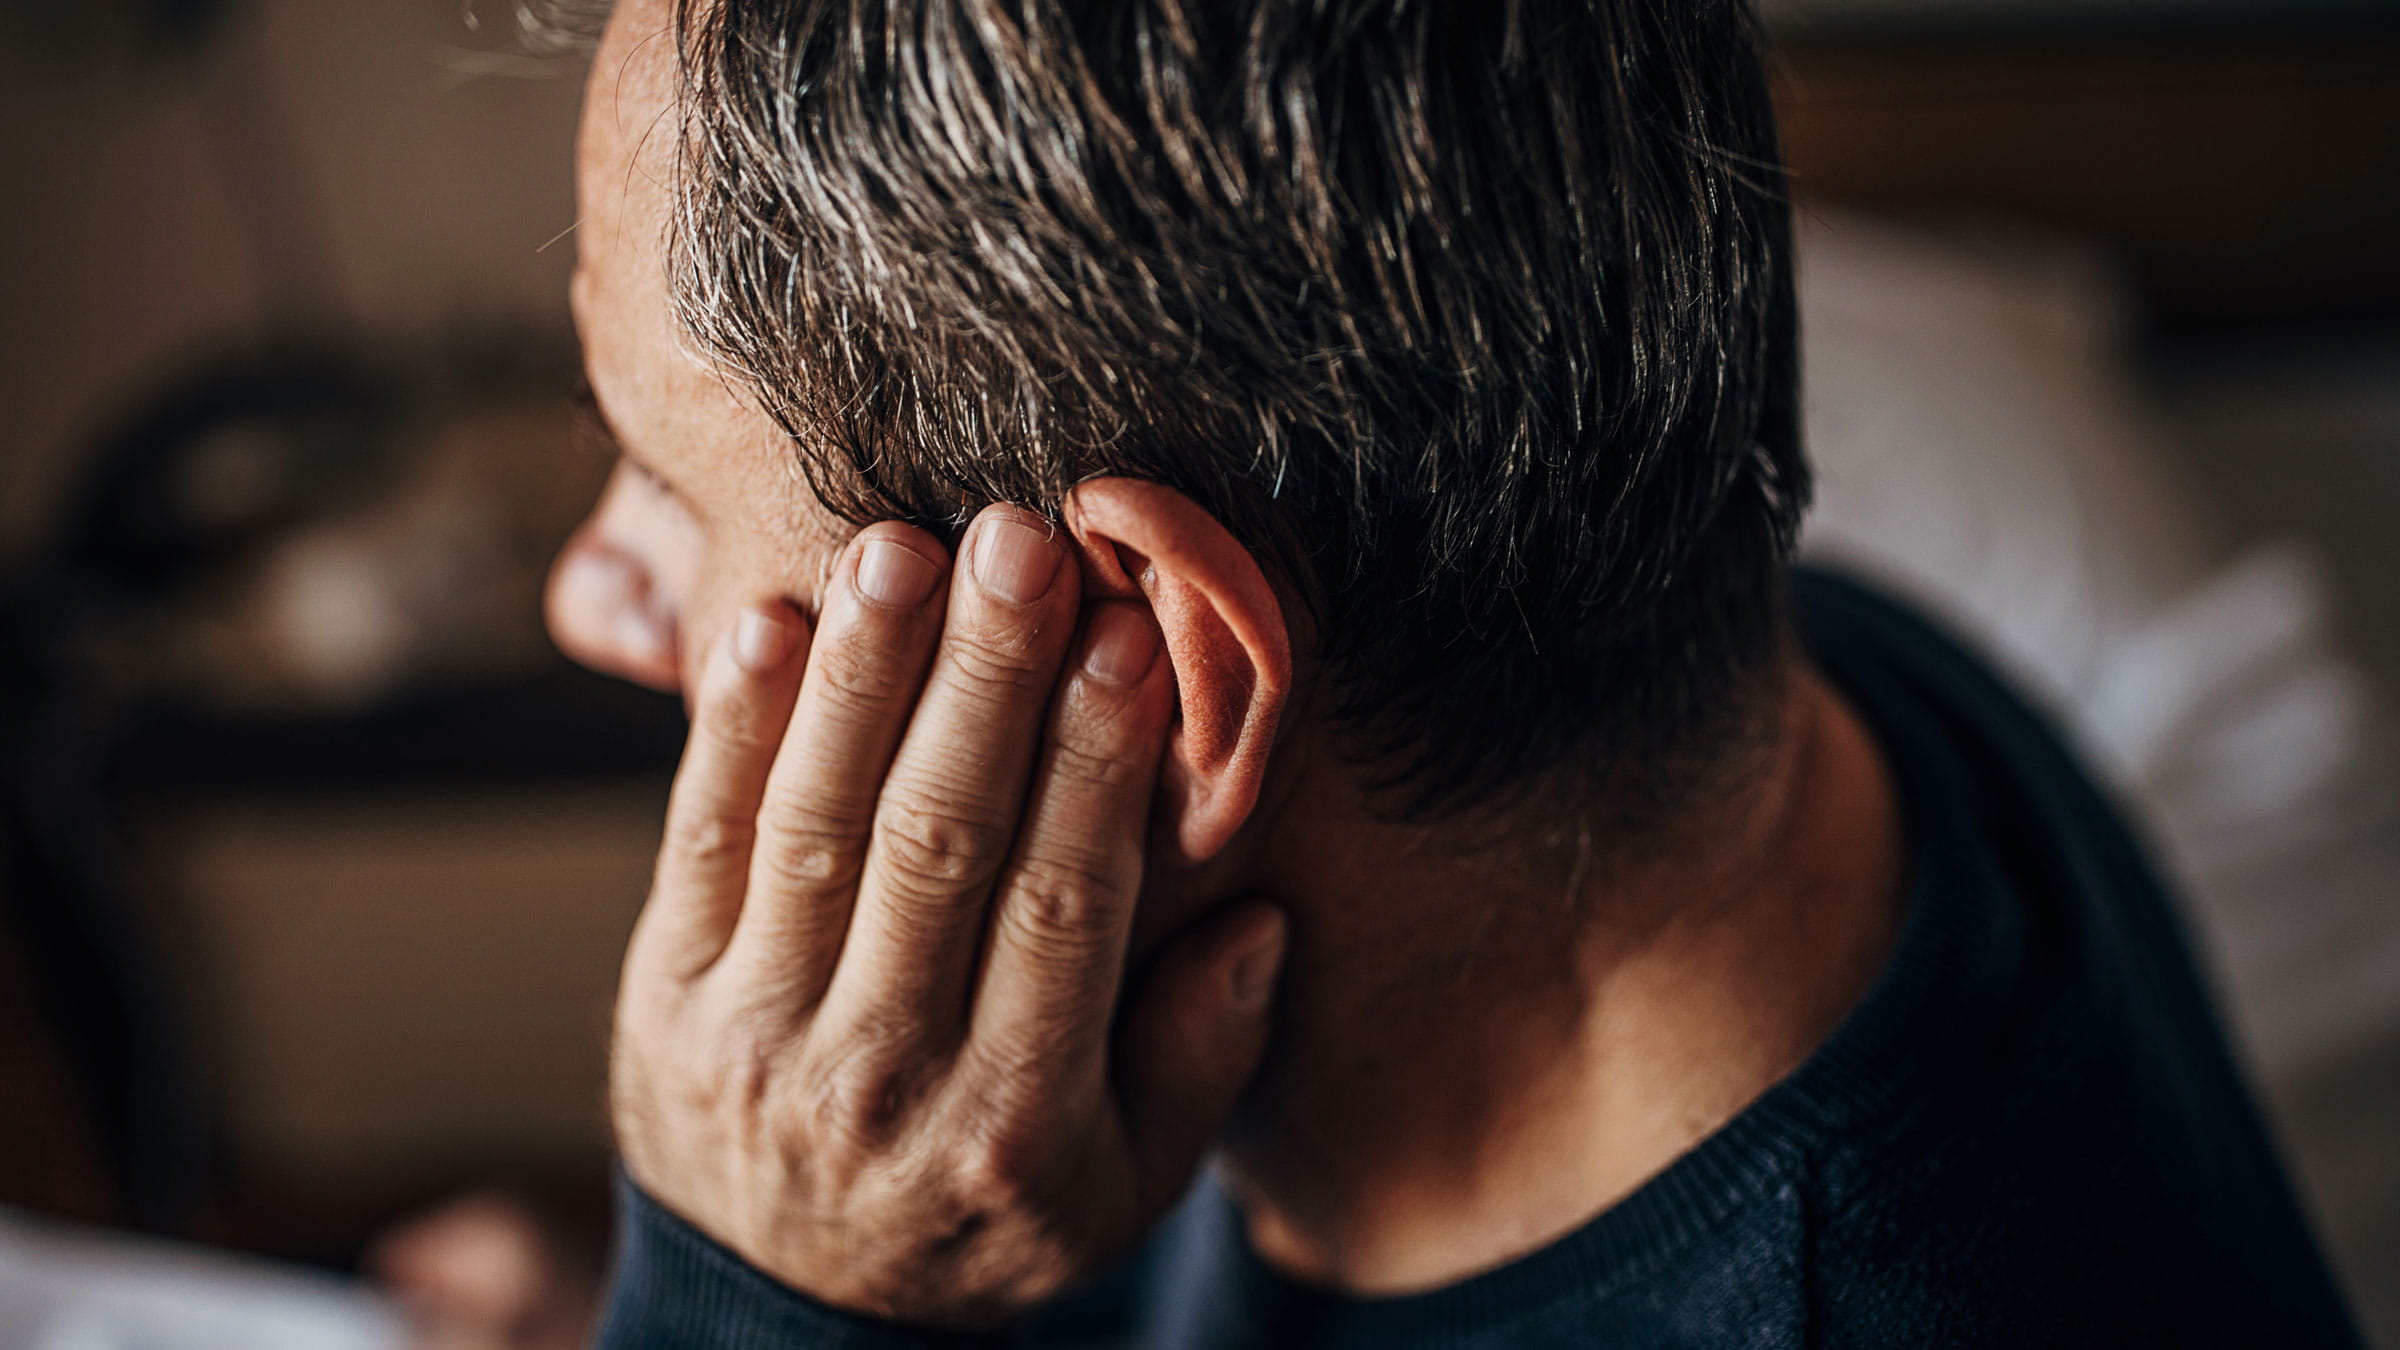 Man suffering from ringing in his ears